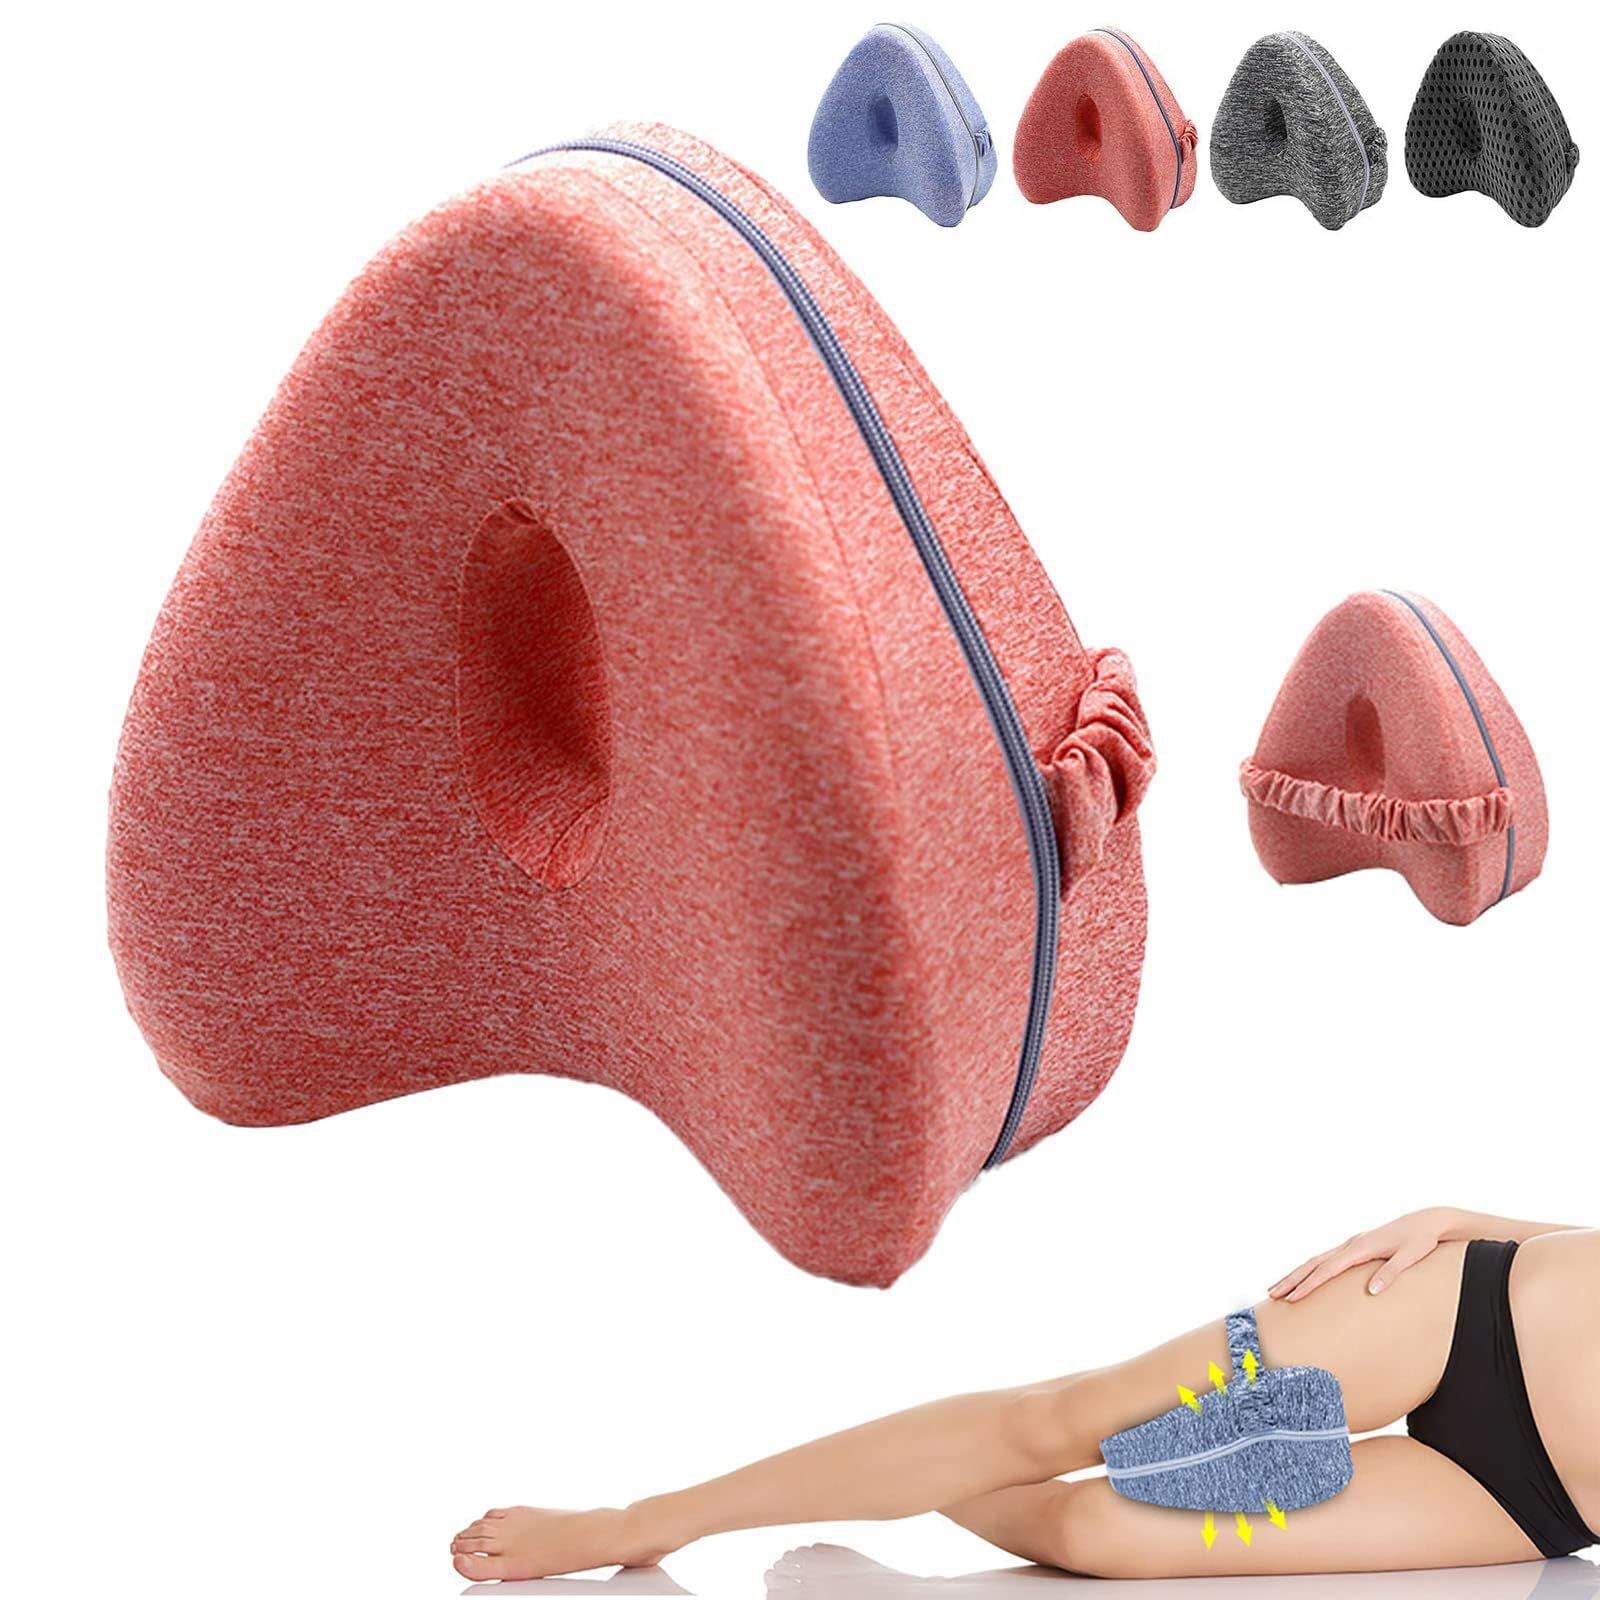  Smoothspine Alignment Pillow, Relieve Hip Pain & Sciatica, Leg  & Knee Foam Support Pillow, Everlasting Comfort Knee Pillow for Side  Sleepers, Leg Pillows for Relieving Leg (Pink) : Home & Kitchen